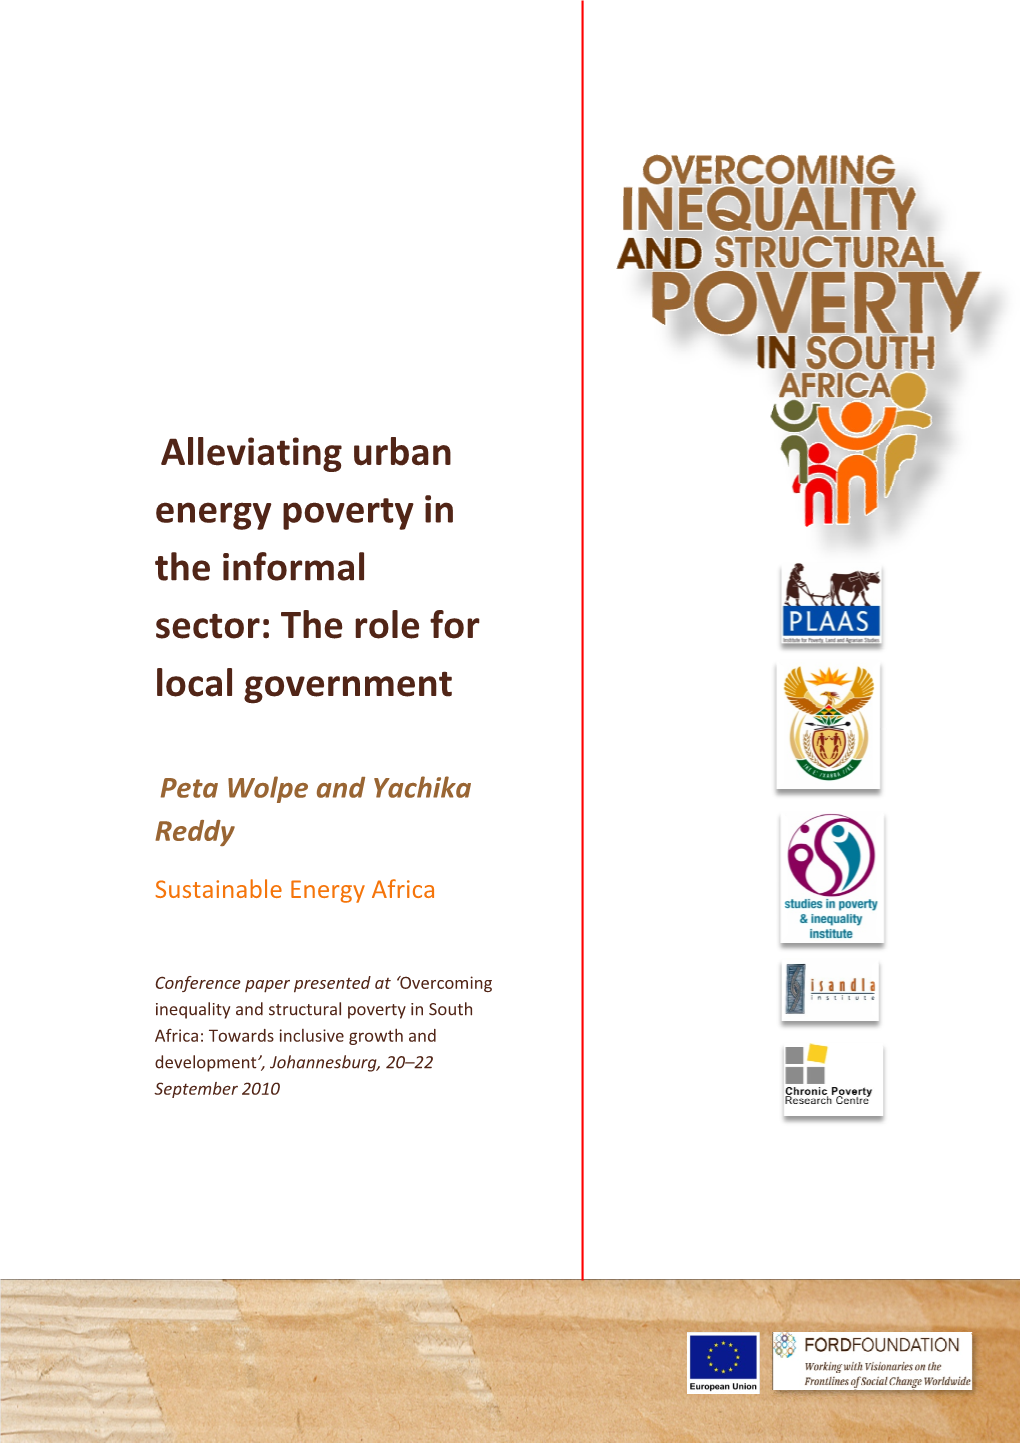 Alleviating Urban Energy Poverty the Informal Sector